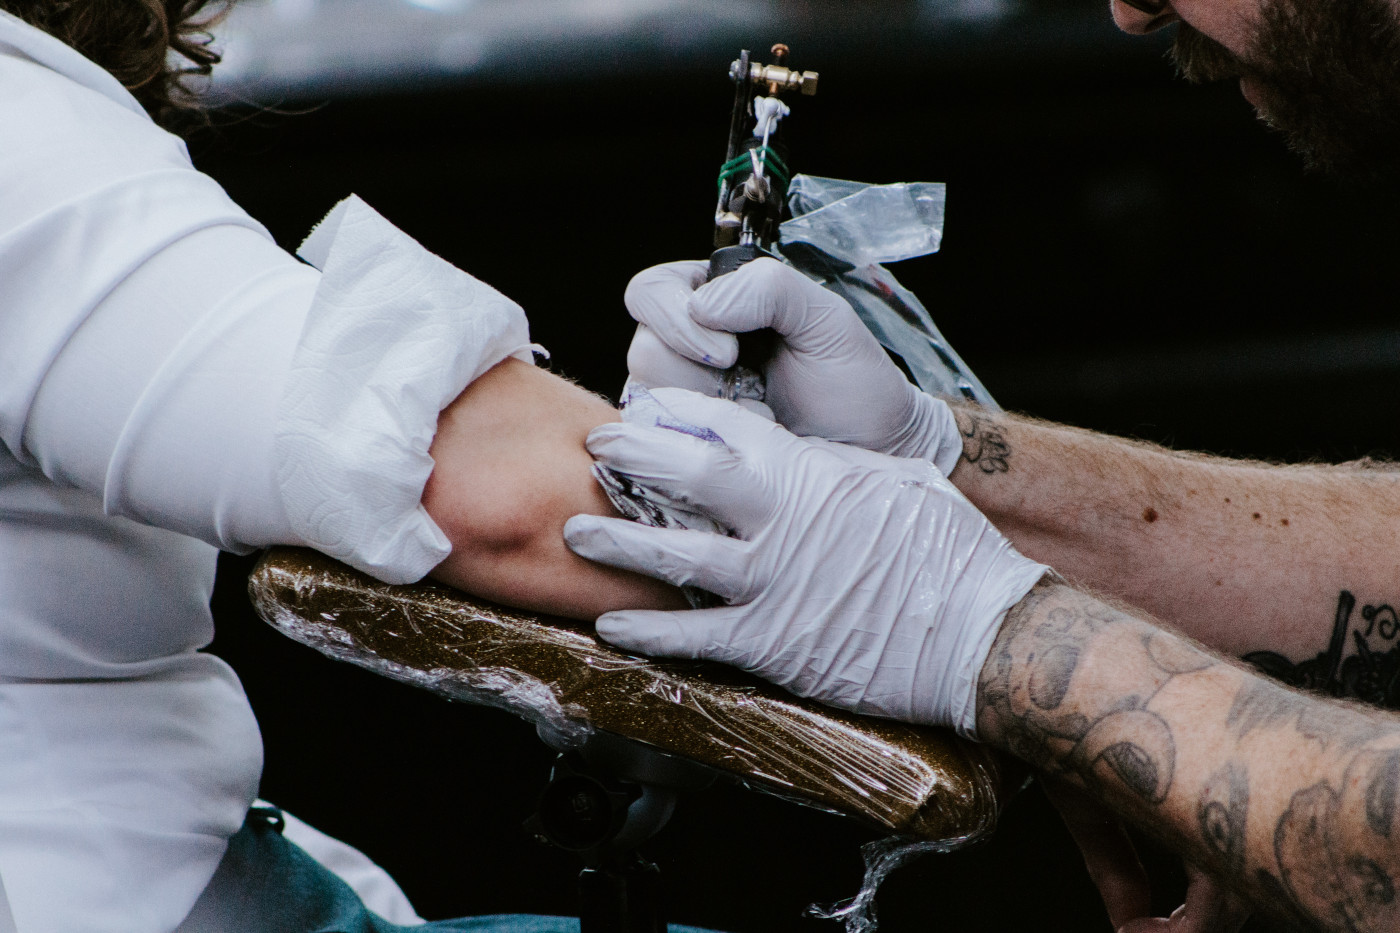 A close up of the tattoo being inked.